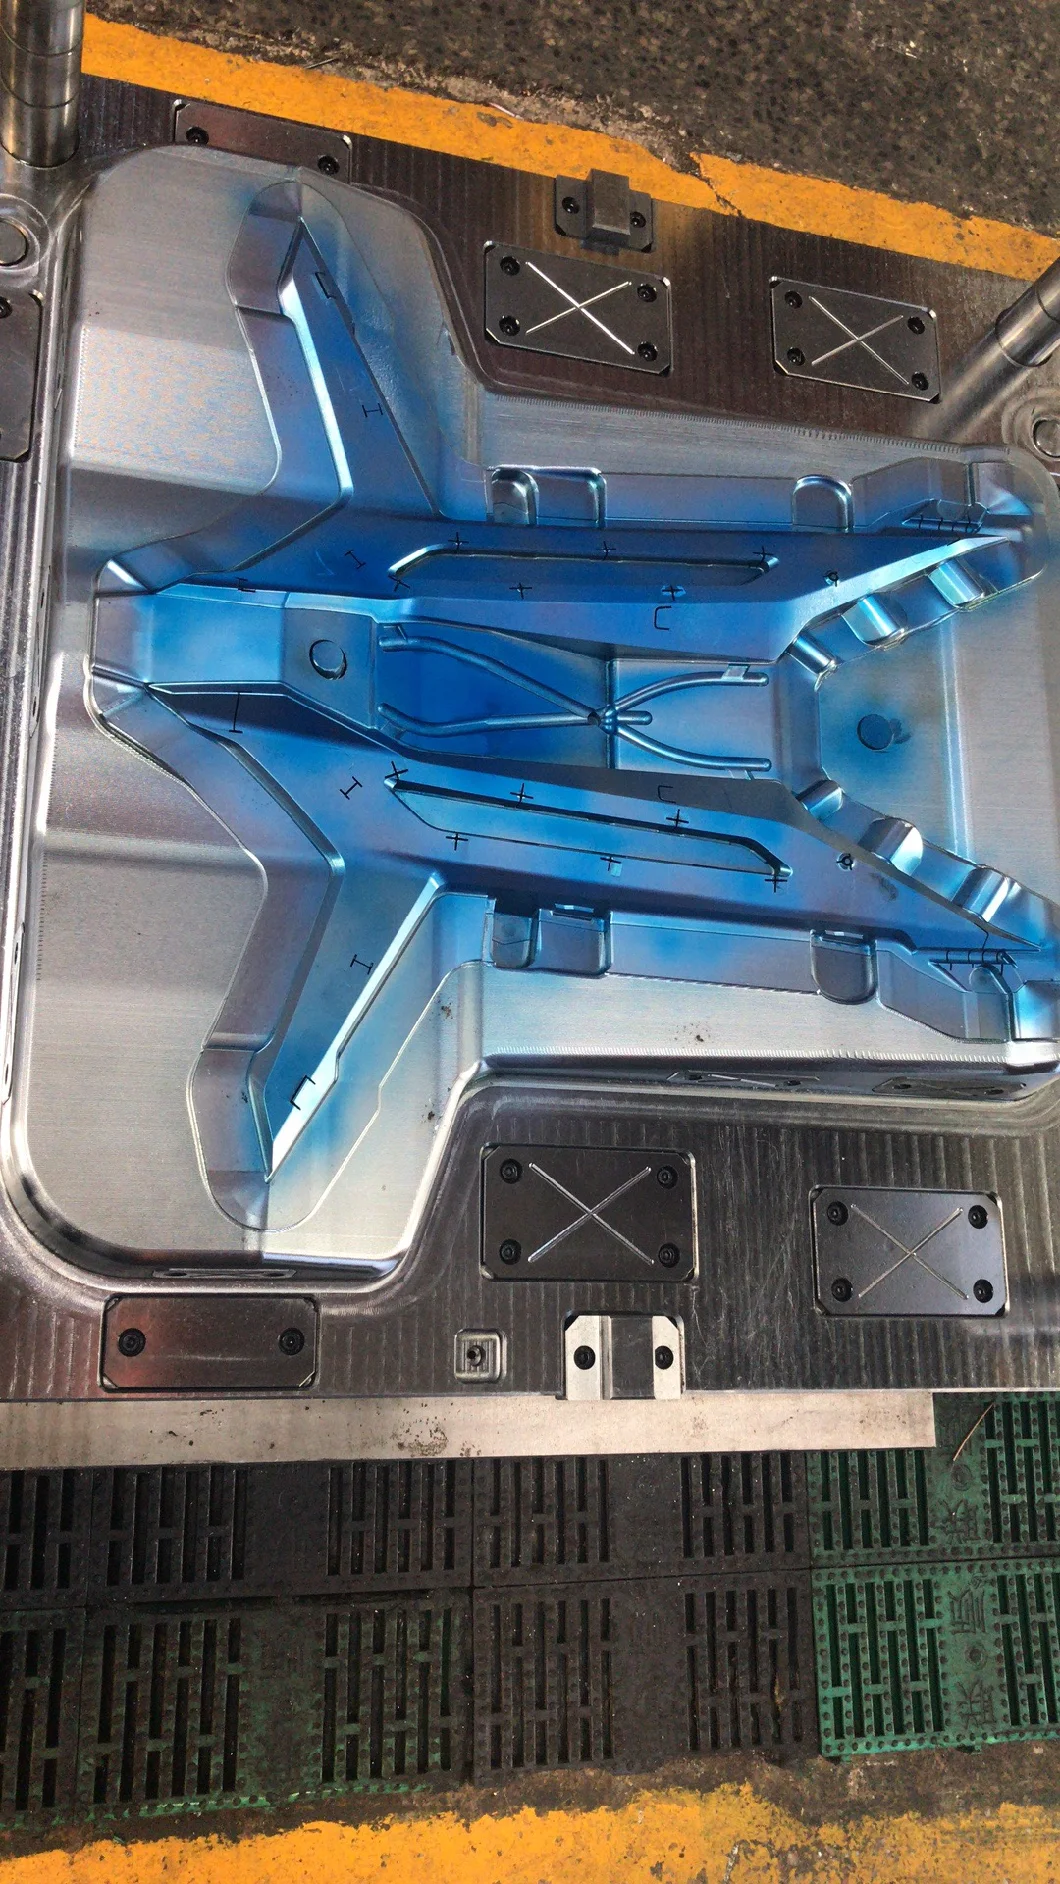 Injection Plastic Moulding Making